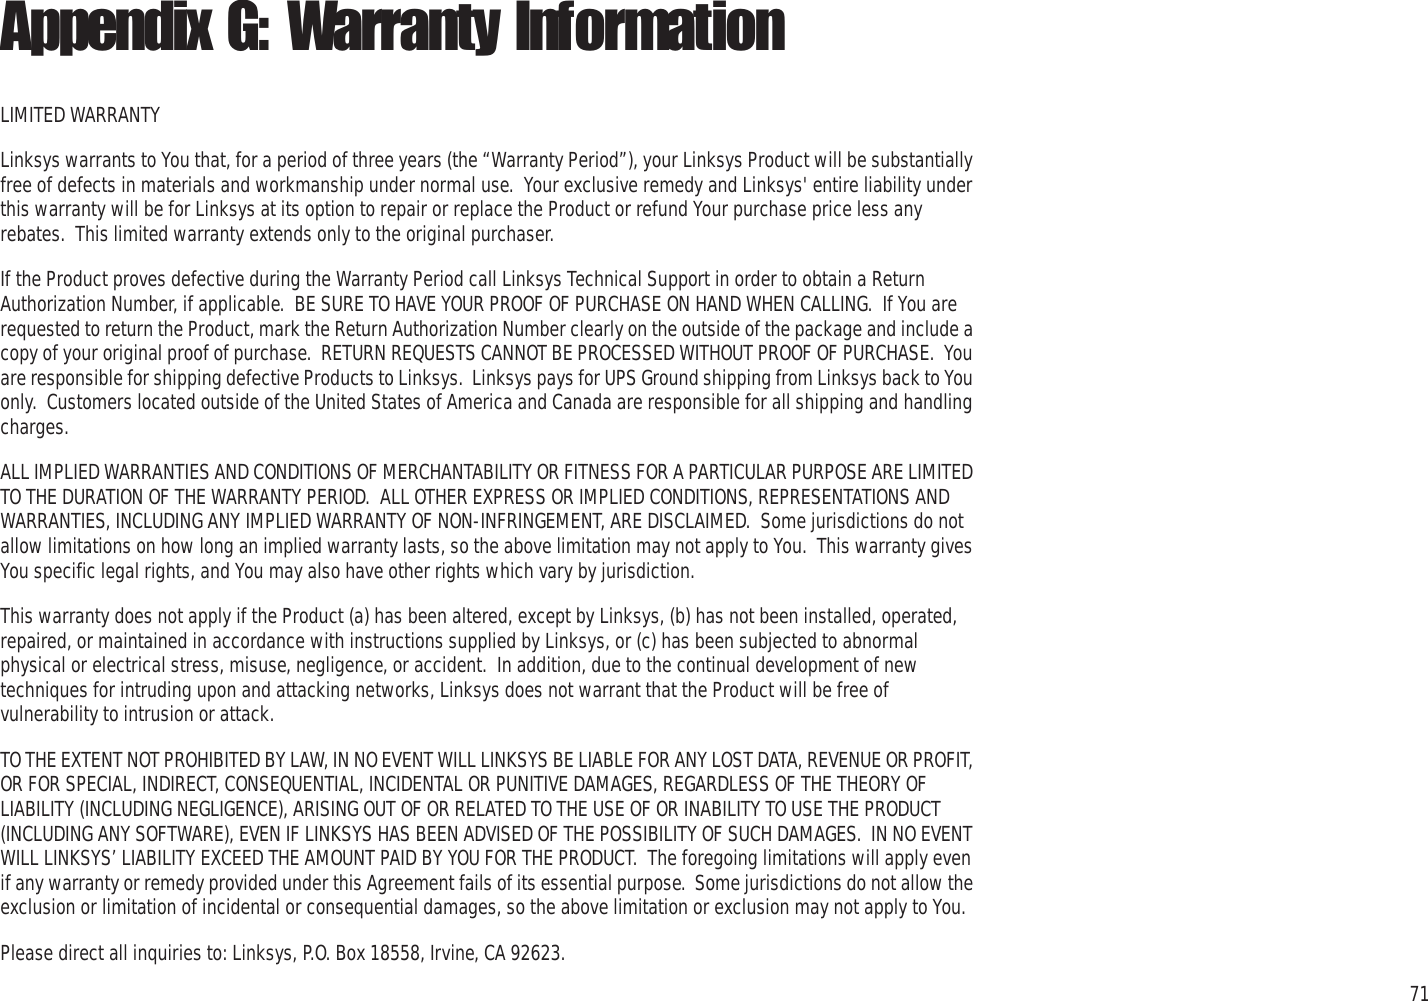 71Appendix G: Warranty InformationWireless-G PTZ Internet Camera with AudioAppendix G: Warranty InformationLIMITED WARRANTYLinksys warrants to You that, for a period of three years (the “Warranty Period”), your Linksys Product will be substantially free of defects in materials and workmanship under normal use.  Your exclusive remedy and Linksys&apos; entire liability under this warranty will be for Linksys at its option to repair or replace the Product or refund Your purchase price less any rebates.  This limited warranty extends only to the original purchaser.  If the Product proves defective during the Warranty Period call Linksys Technical Support in order to obtain a Return Authorization Number, if applicable.  BE SURE TO HAVE YOUR PROOF OF PURCHASE ON HAND WHEN CALLING.  If You are requested to return the Product, mark the Return Authorization Number clearly on the outside of the package and include a copy of your original proof of purchase.  RETURN REQUESTS CANNOT BE PROCESSED WITHOUT PROOF OF PURCHASE.  You are responsible for shipping defective Products to Linksys.  Linksys pays for UPS Ground shipping from Linksys back to You only.  Customers located outside of the United States of America and Canada are responsible for all shipping and handling charges. ALL IMPLIED WARRANTIES AND CONDITIONS OF MERCHANTABILITY OR FITNESS FOR A PARTICULAR PURPOSE ARE LIMITED TO THE DURATION OF THE WARRANTY PERIOD.  ALL OTHER EXPRESS OR IMPLIED CONDITIONS, REPRESENTATIONS AND WARRANTIES, INCLUDING ANY IMPLIED WARRANTY OF NON-INFRINGEMENT, ARE DISCLAIMED.  Some jurisdictions do not allow limitations on how long an implied warranty lasts, so the above limitation may not apply to You.  This warranty gives You specific legal rights, and You may also have other rights which vary by jurisdiction.This warranty does not apply if the Product (a) has been altered, except by Linksys, (b) has not been installed, operated, repaired, or maintained in accordance with instructions supplied by Linksys, or (c) has been subjected to abnormal physical or electrical stress, misuse, negligence, or accident.  In addition, due to the continual development of new techniques for intruding upon and attacking networks, Linksys does not warrant that the Product will be free of vulnerability to intrusion or attack.TO THE EXTENT NOT PROHIBITED BY LAW, IN NO EVENT WILL LINKSYS BE LIABLE FOR ANY LOST DATA, REVENUE OR PROFIT, OR FOR SPECIAL, INDIRECT, CONSEQUENTIAL, INCIDENTAL OR PUNITIVE DAMAGES, REGARDLESS OF THE THEORY OF LIABILITY (INCLUDING NEGLIGENCE), ARISING OUT OF OR RELATED TO THE USE OF OR INABILITY TO USE THE PRODUCT (INCLUDING ANY SOFTWARE), EVEN IF LINKSYS HAS BEEN ADVISED OF THE POSSIBILITY OF SUCH DAMAGES.  IN NO EVENT WILL LINKSYS’ LIABILITY EXCEED THE AMOUNT PAID BY YOU FOR THE PRODUCT.  The foregoing limitations will apply even if any warranty or remedy provided under this Agreement fails of its essential purpose.  Some jurisdictions do not allow the exclusion or limitation of incidental or consequential damages, so the above limitation or exclusion may not apply to You.Please direct all inquiries to: Linksys, P.O. Box 18558, Irvine, CA 92623.